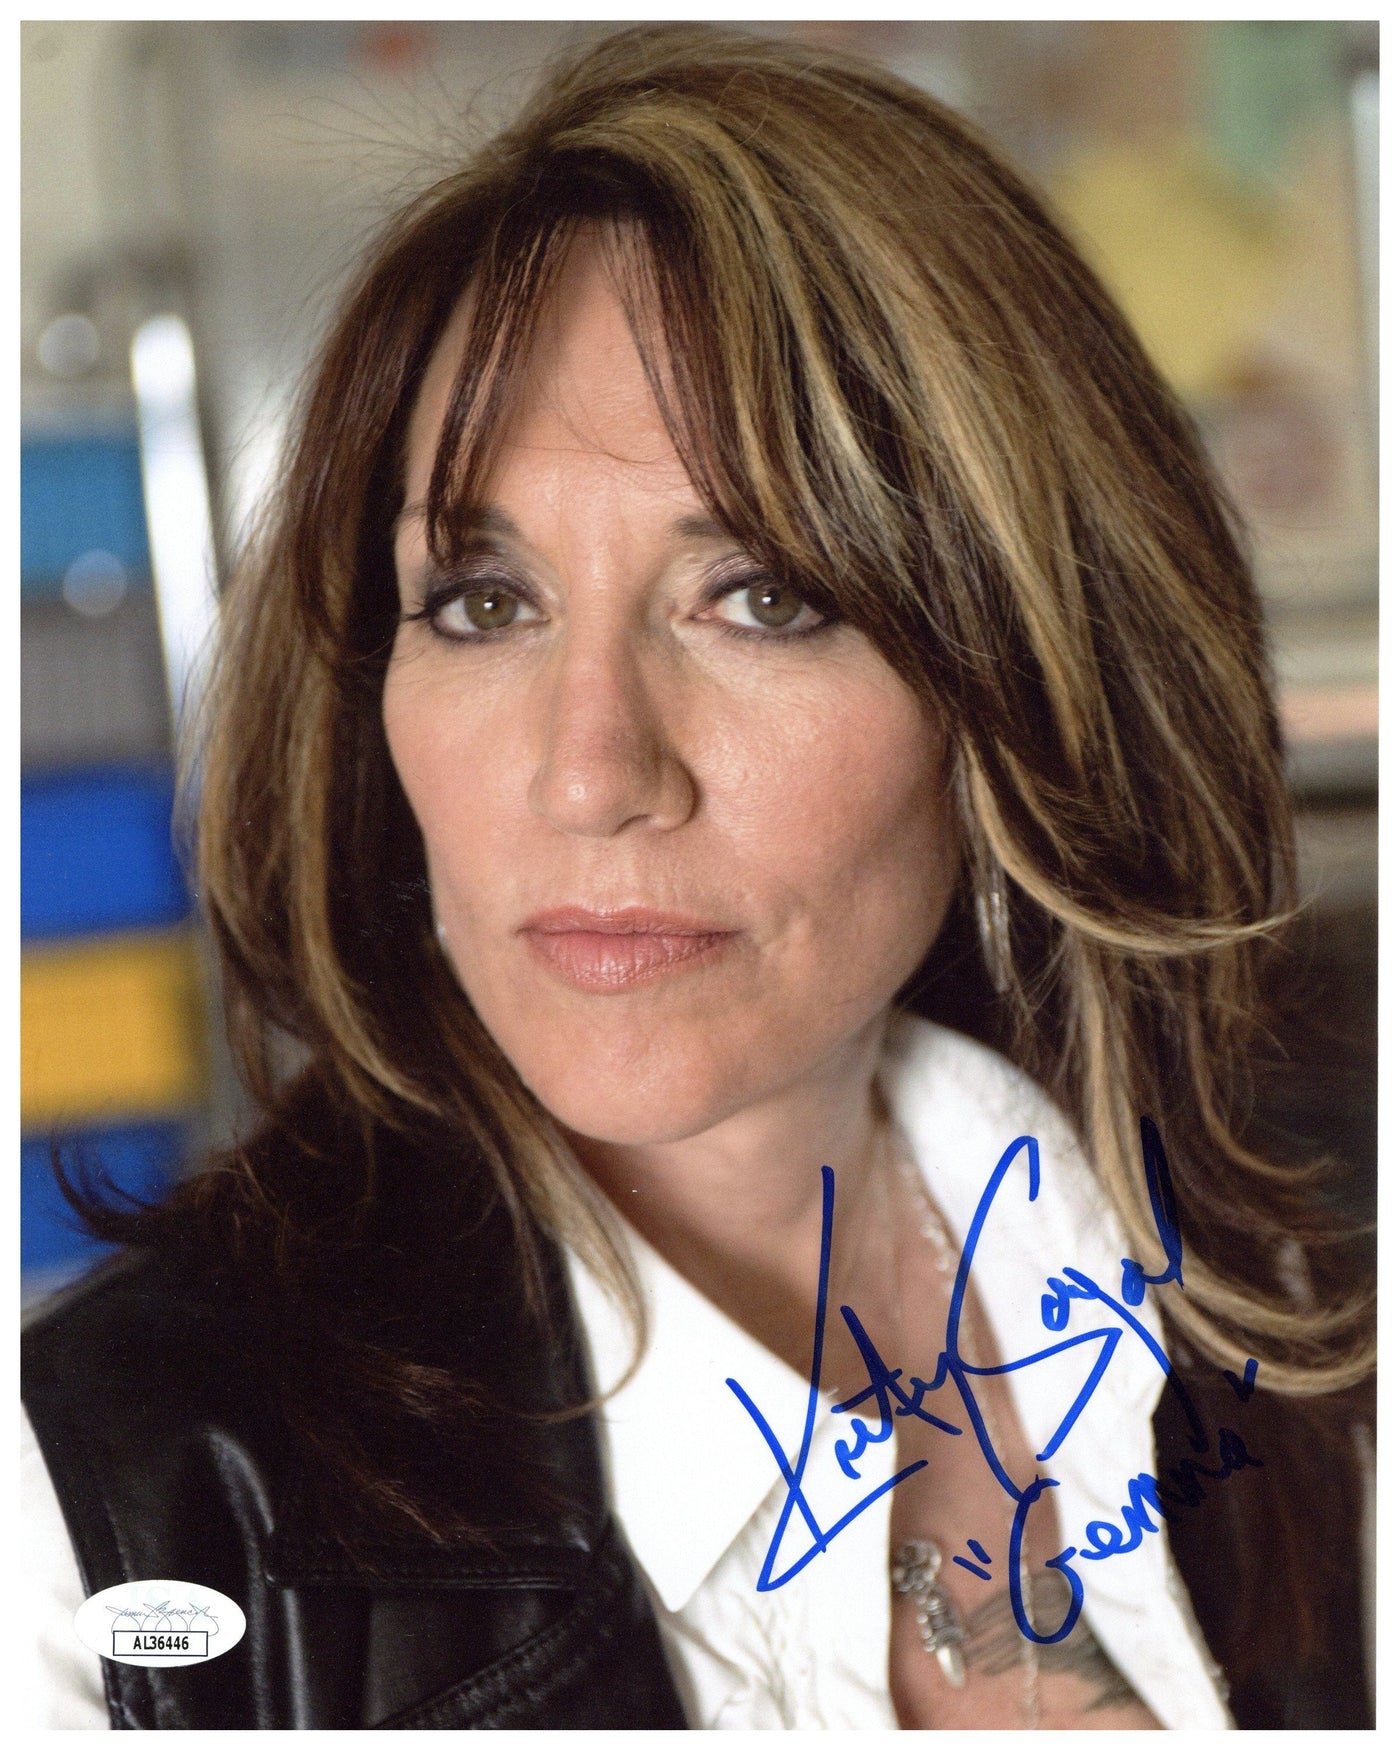 Katey Sagal Signed 8x10 Photo Sons of Anarchy Authentic Autographed JSA COA #2